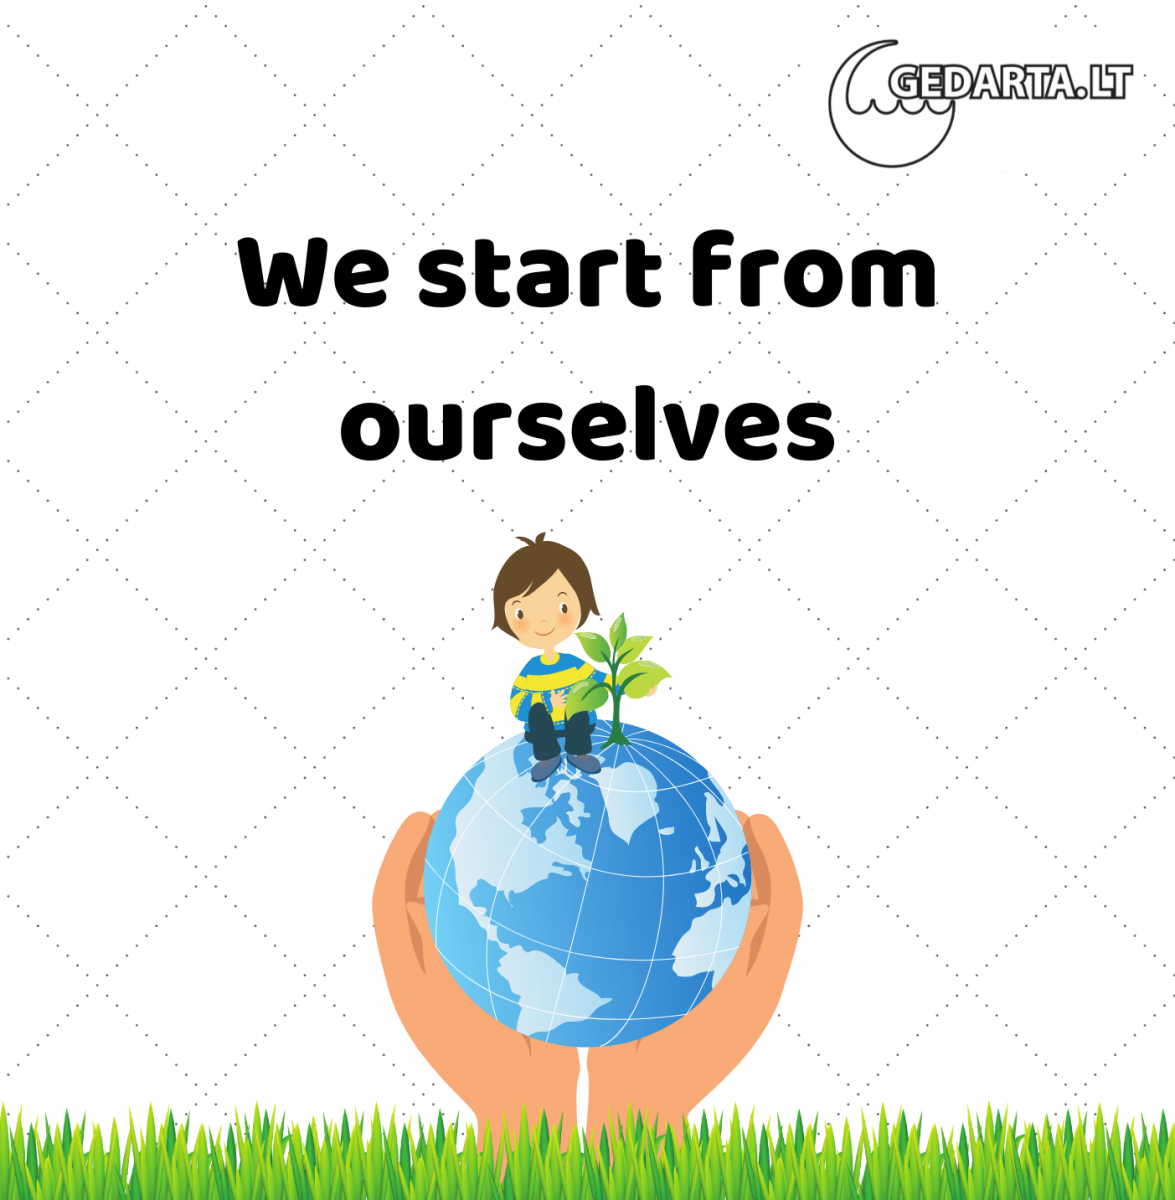 We start from ourselves